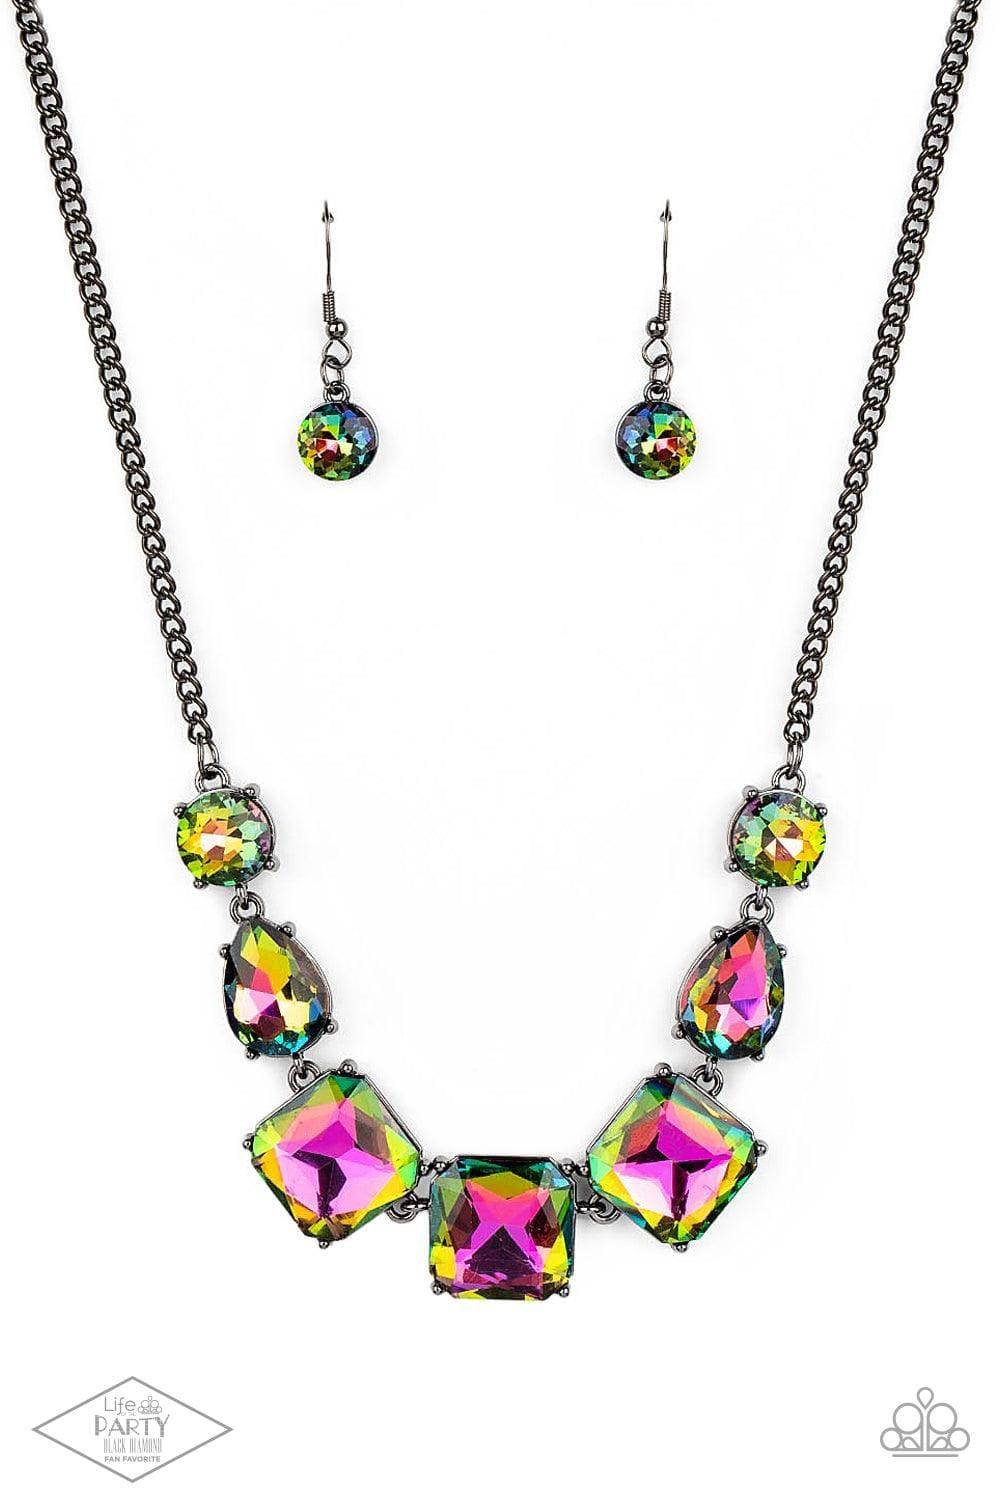 Paparazzi Accessories - Unfiltered Confidence - Multicolor Oil Spill Necklace Life Of The Party Bring Back - Bling by JessieK